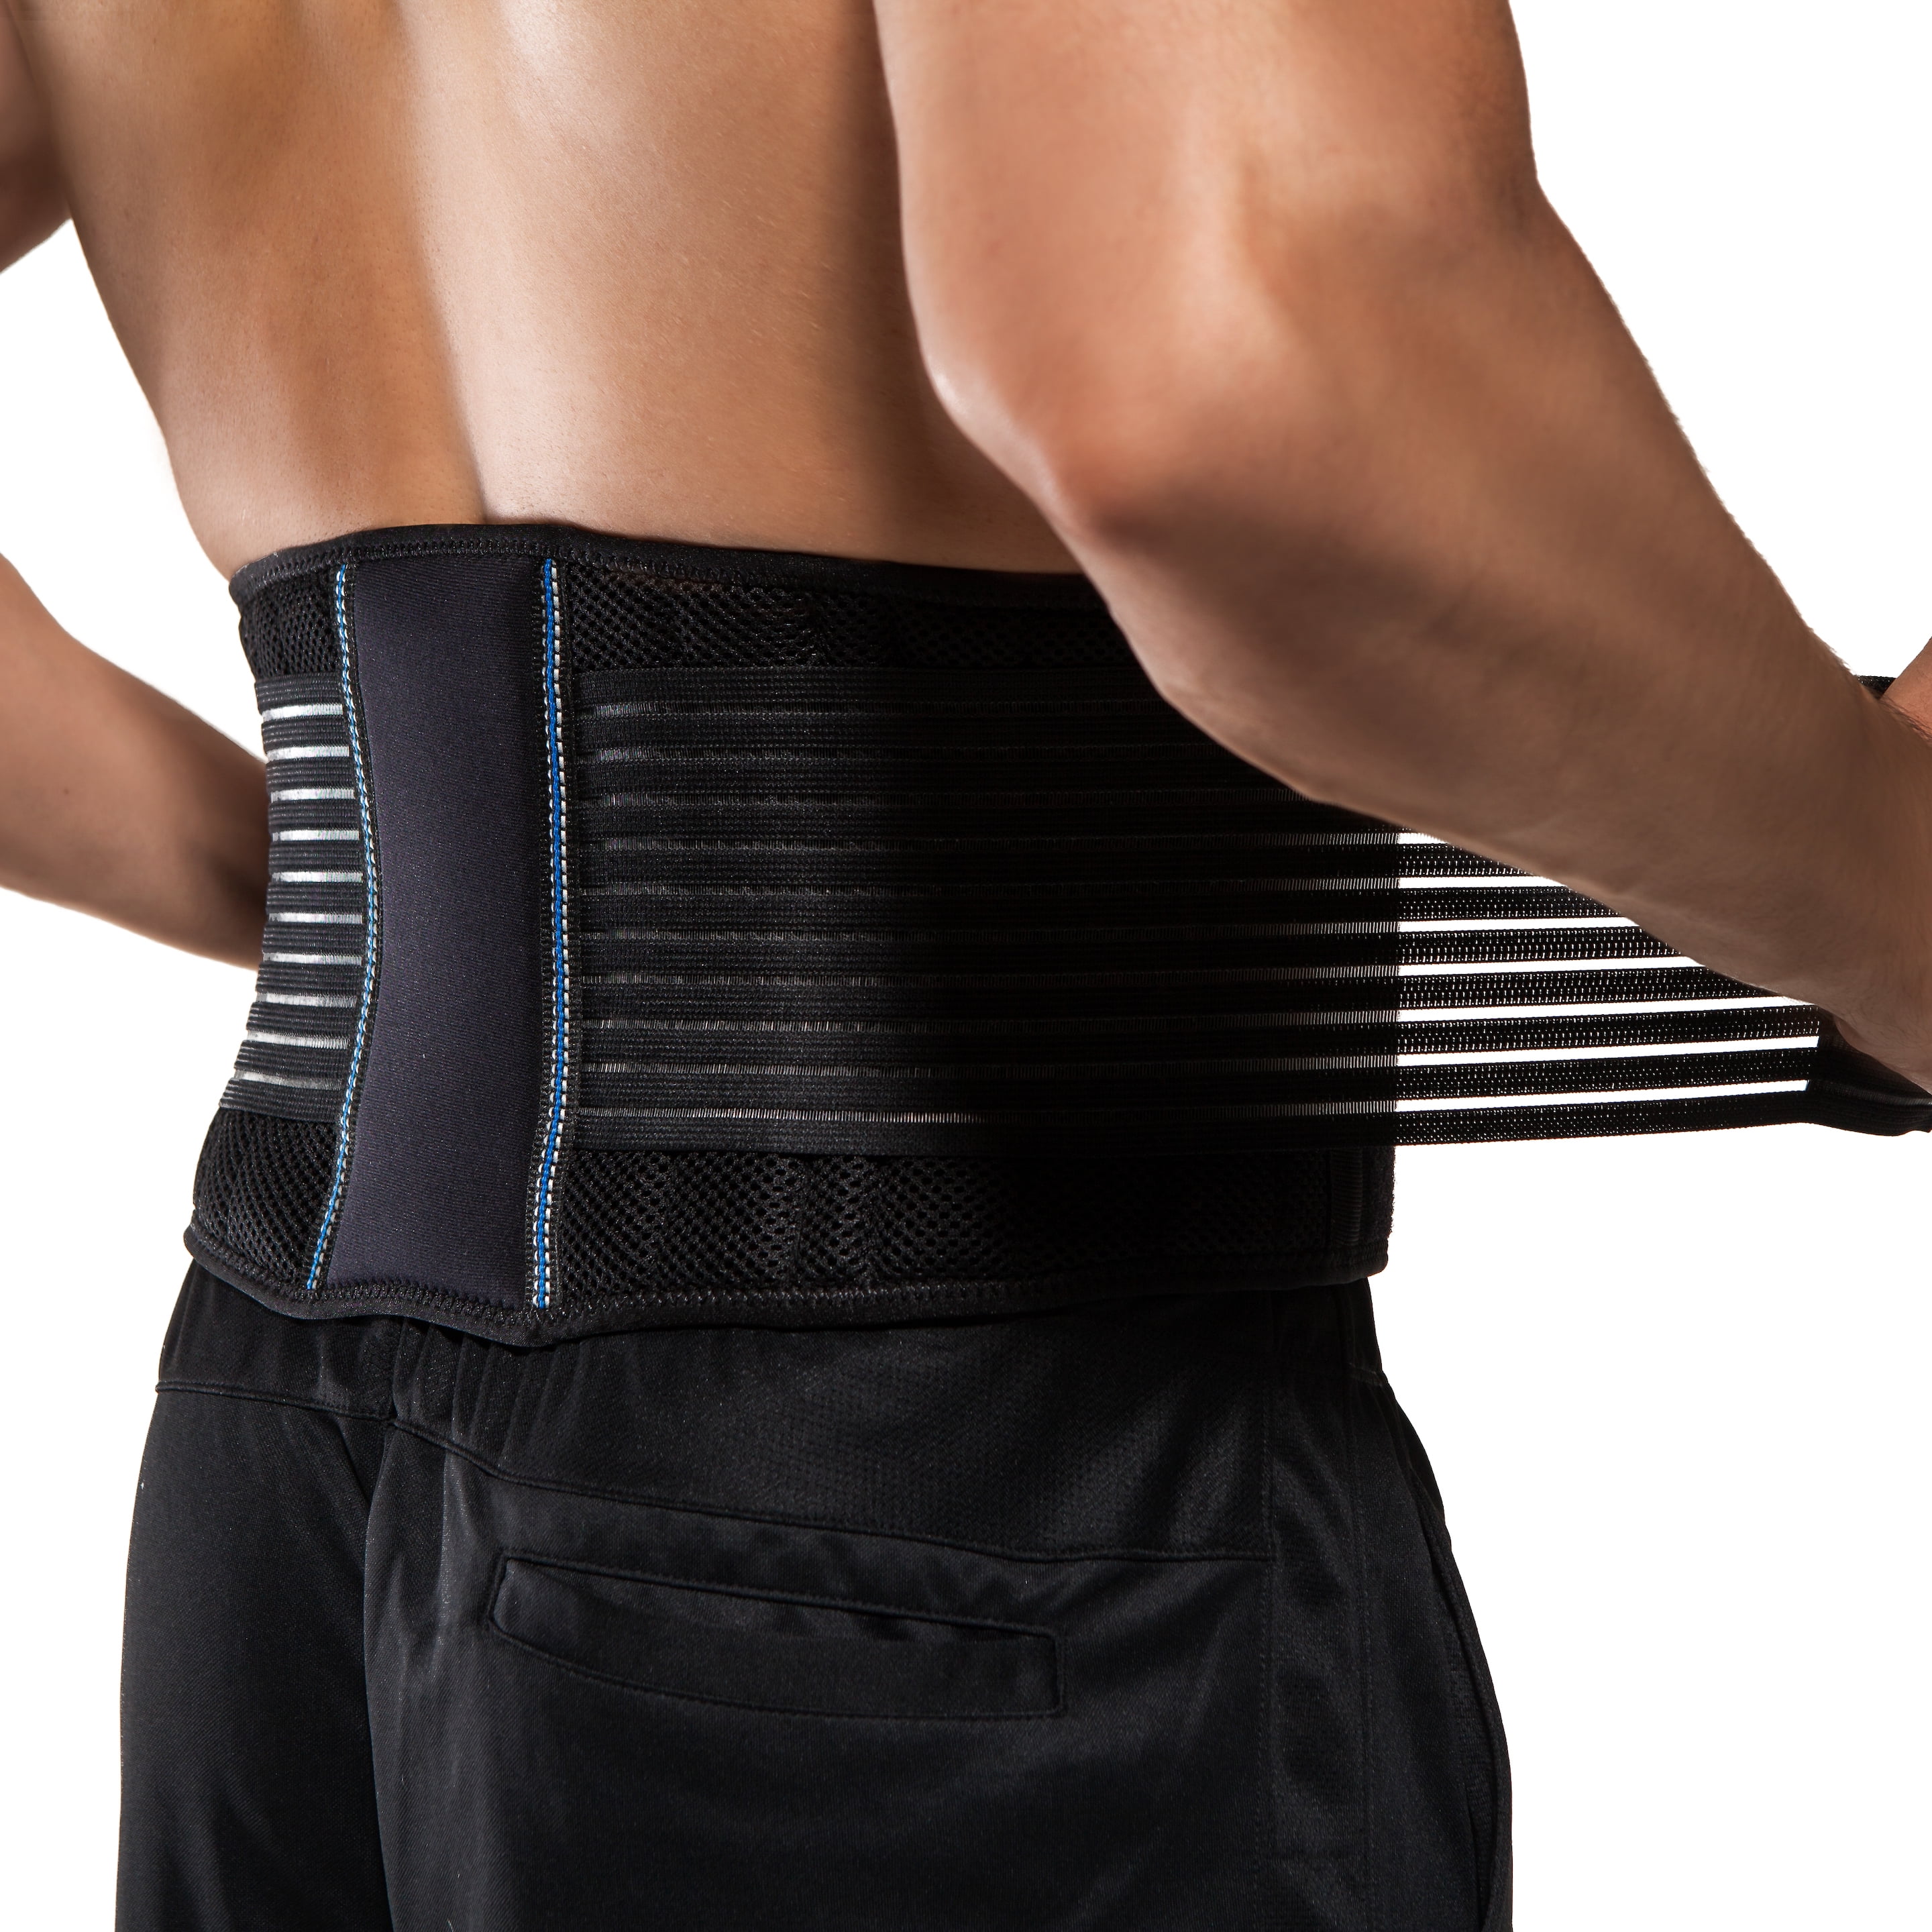 BraceUP Stabilizing Lumbar Lower Back Brace and Support Belt with Dual Adjustable Straps and Breathable Mesh Panels S/M 